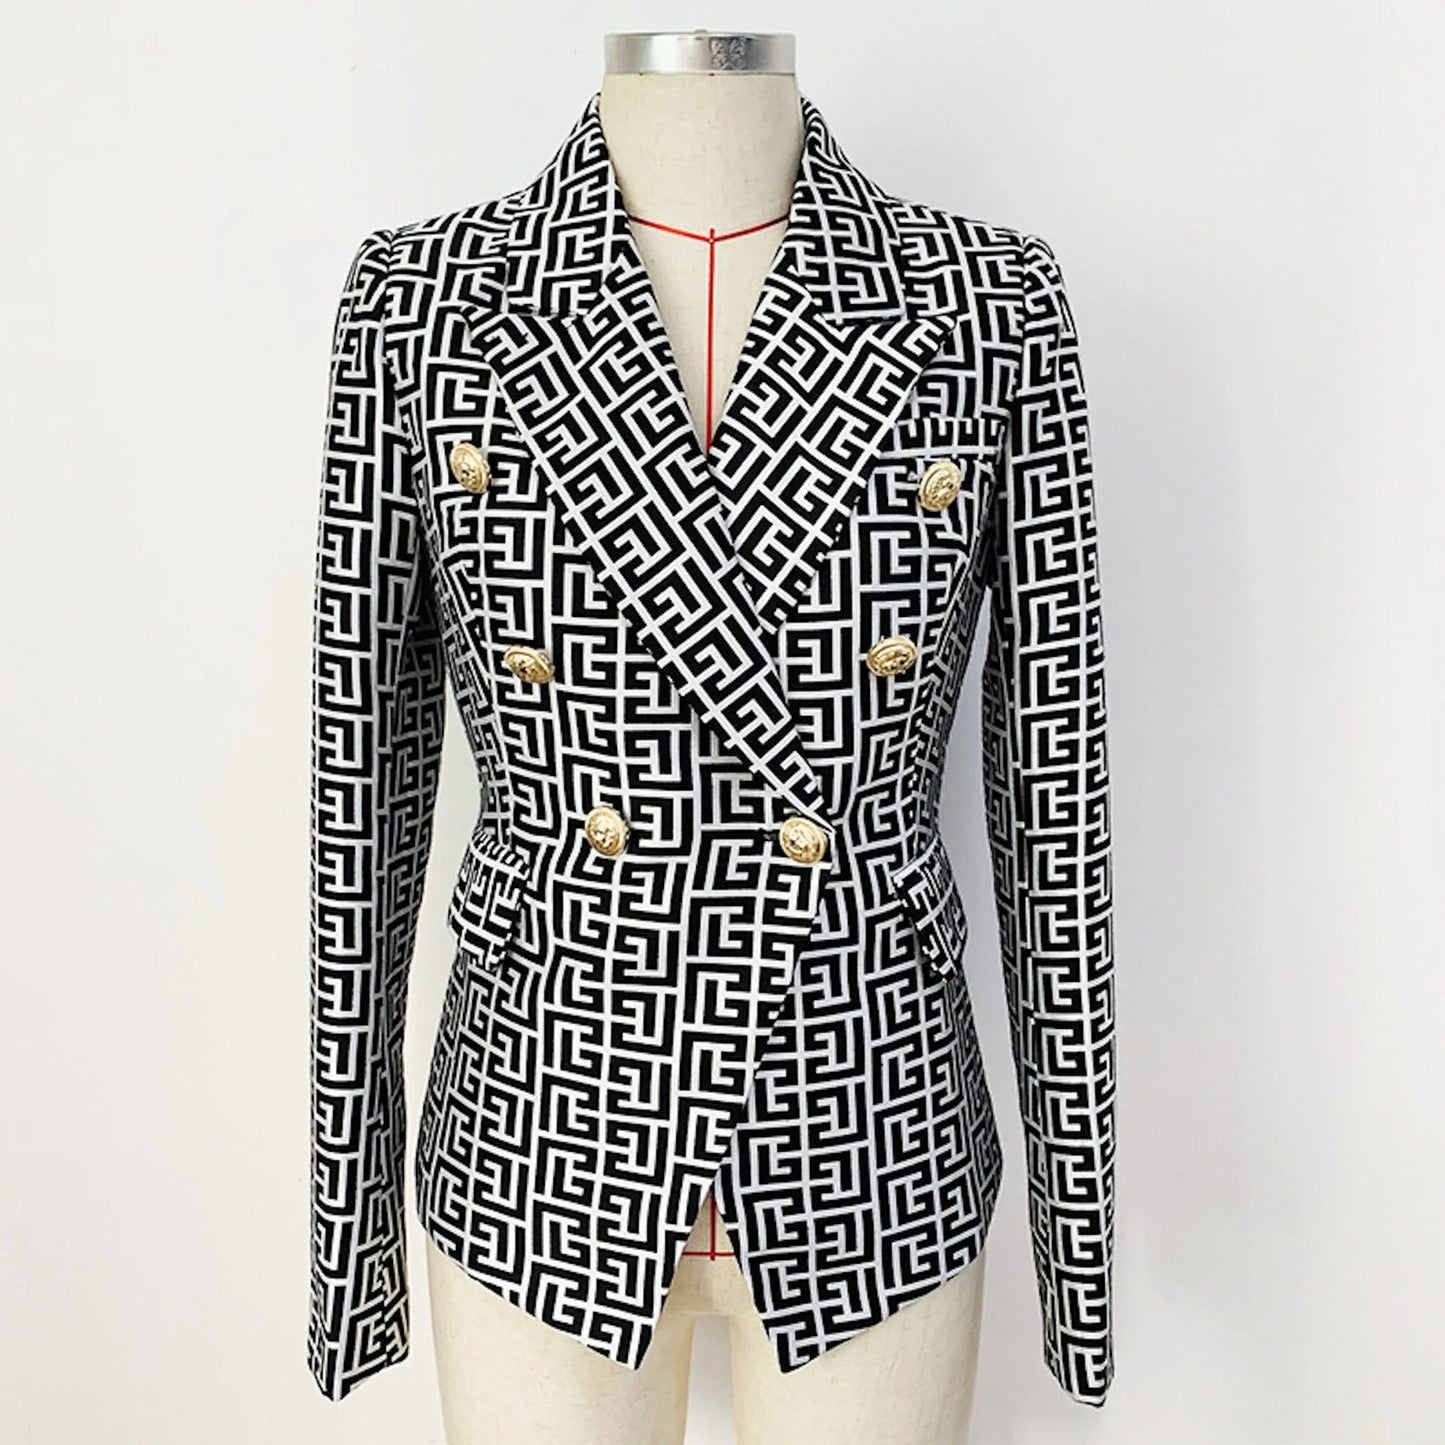 Women's Golden Lion Buttons Maze Pattern Fitted Blazer Jacket  UK CUSTOMER SERVICE! Fashion Pioneer - Women's Golden Lion Buttons Maze Pattern Fitted Blazer Jacket , Soft, light and stretchy. This jacket comes with a full lining, soft and comfortable to Wear. Material: Polyester ,Slim fit and long Sleeves with buttons and two pockets. Great for casual, formal, business wear and other special events.